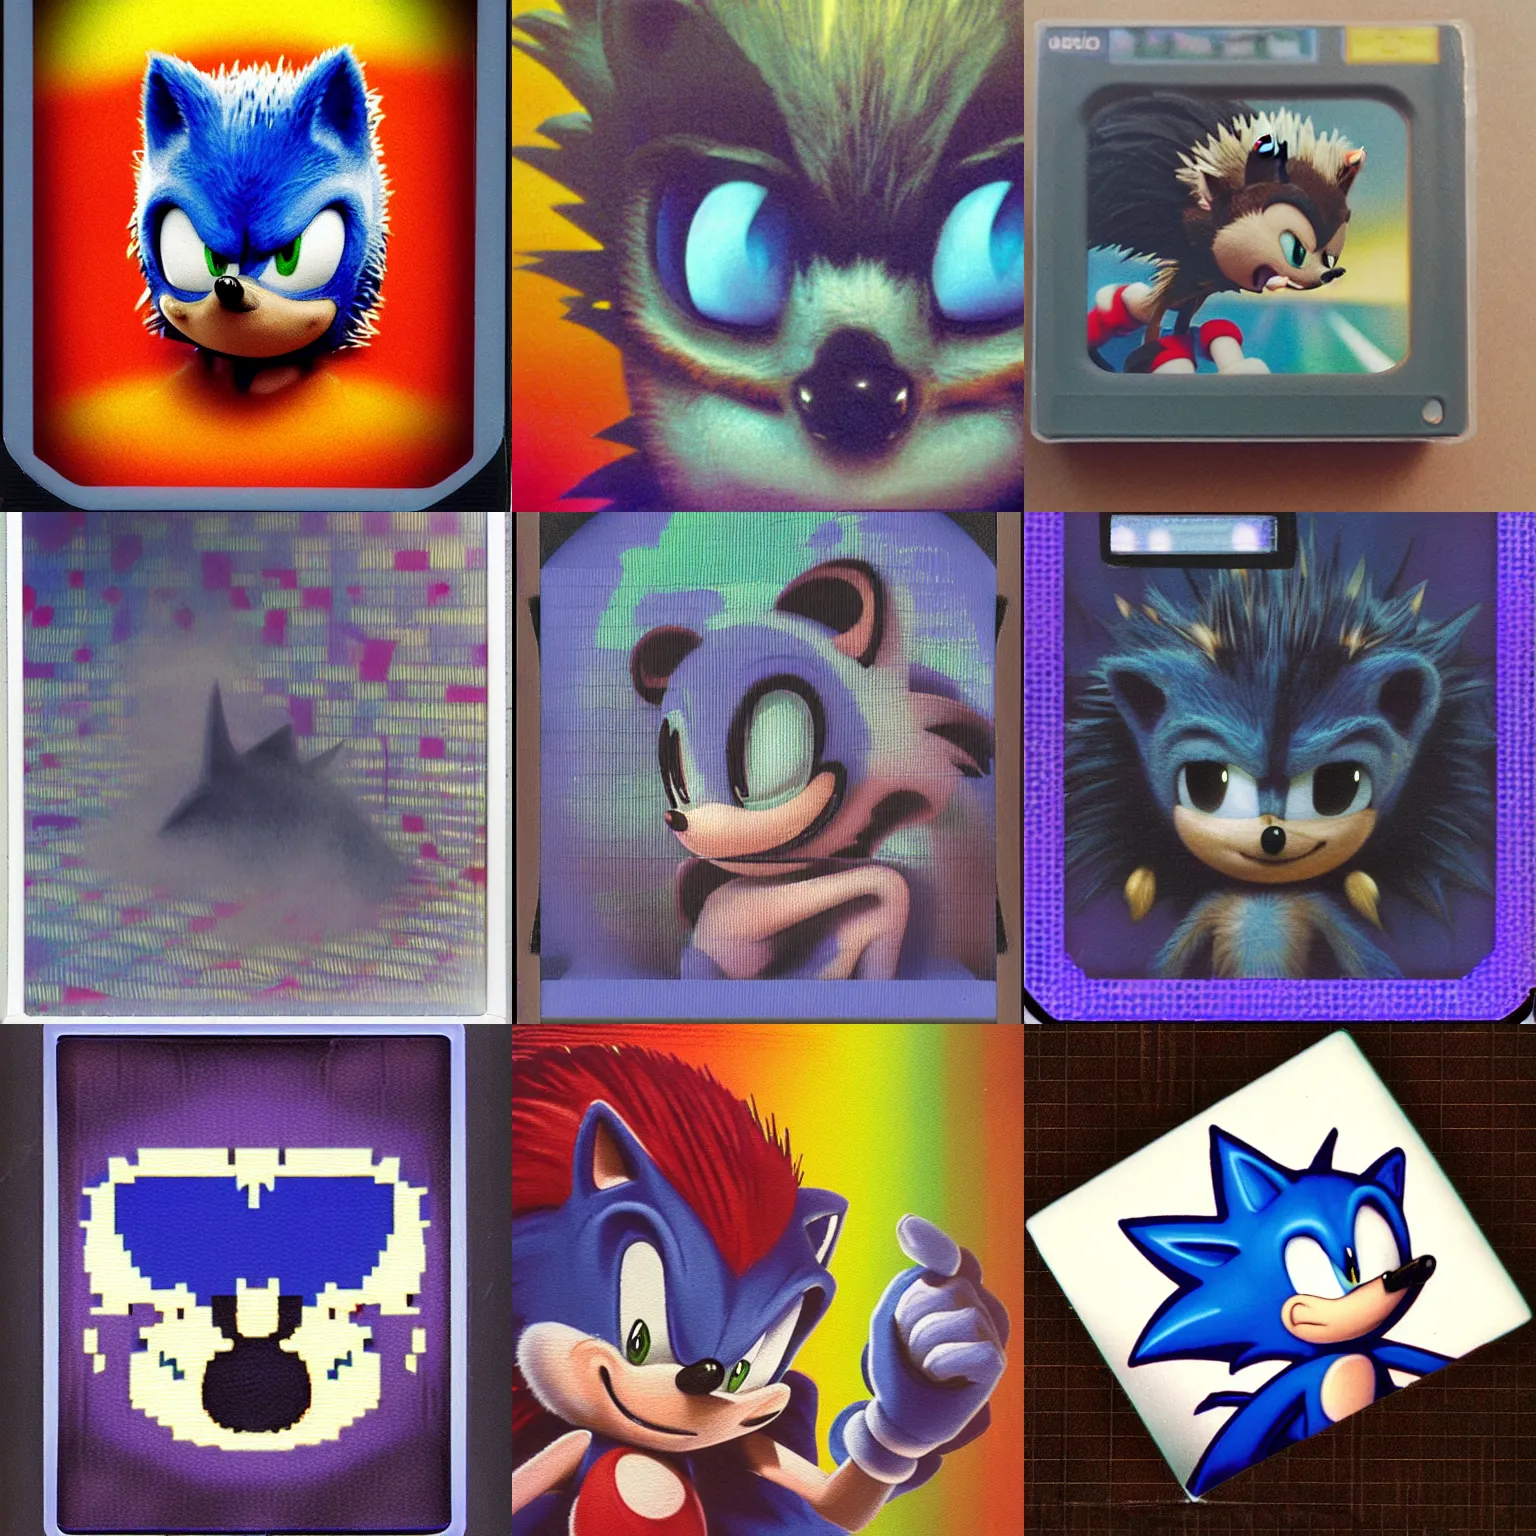 Prompt: close up polaroid instax portrait of sonic hedgehog, matte painting landscape of a surreal sharp foggy detailed professional soft pastels high quality airbrush art album cover of a liquid dissolving airbrush art lsd dmt sonic the hedgehog swimming through cyberspace holo checkerboard background 1 9 9 0 s 1 9 9 2 sega genesis rareware video game album cover